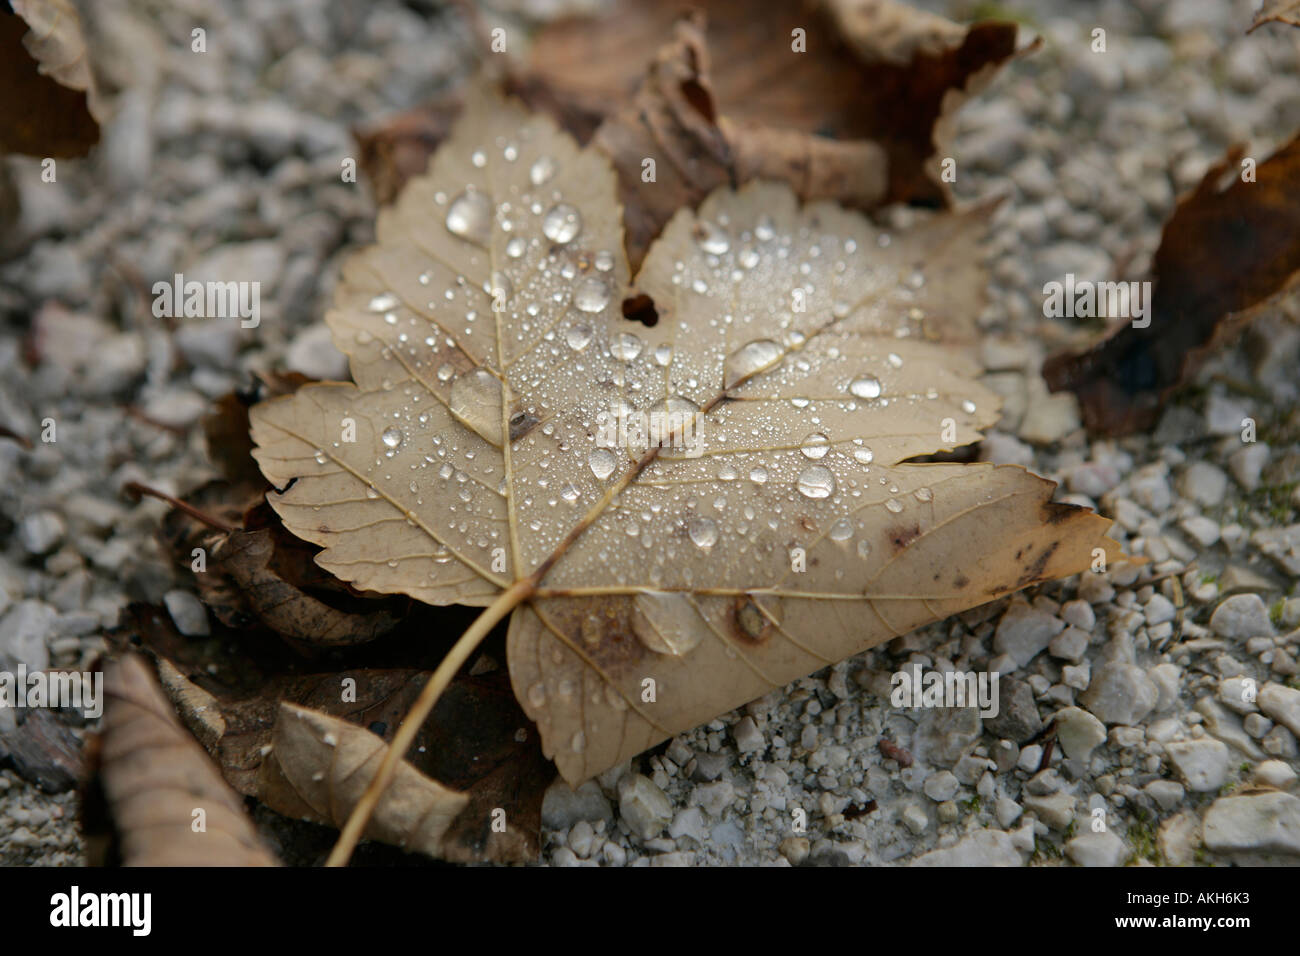 autumn leaf with waterdrops on it Stock Photo